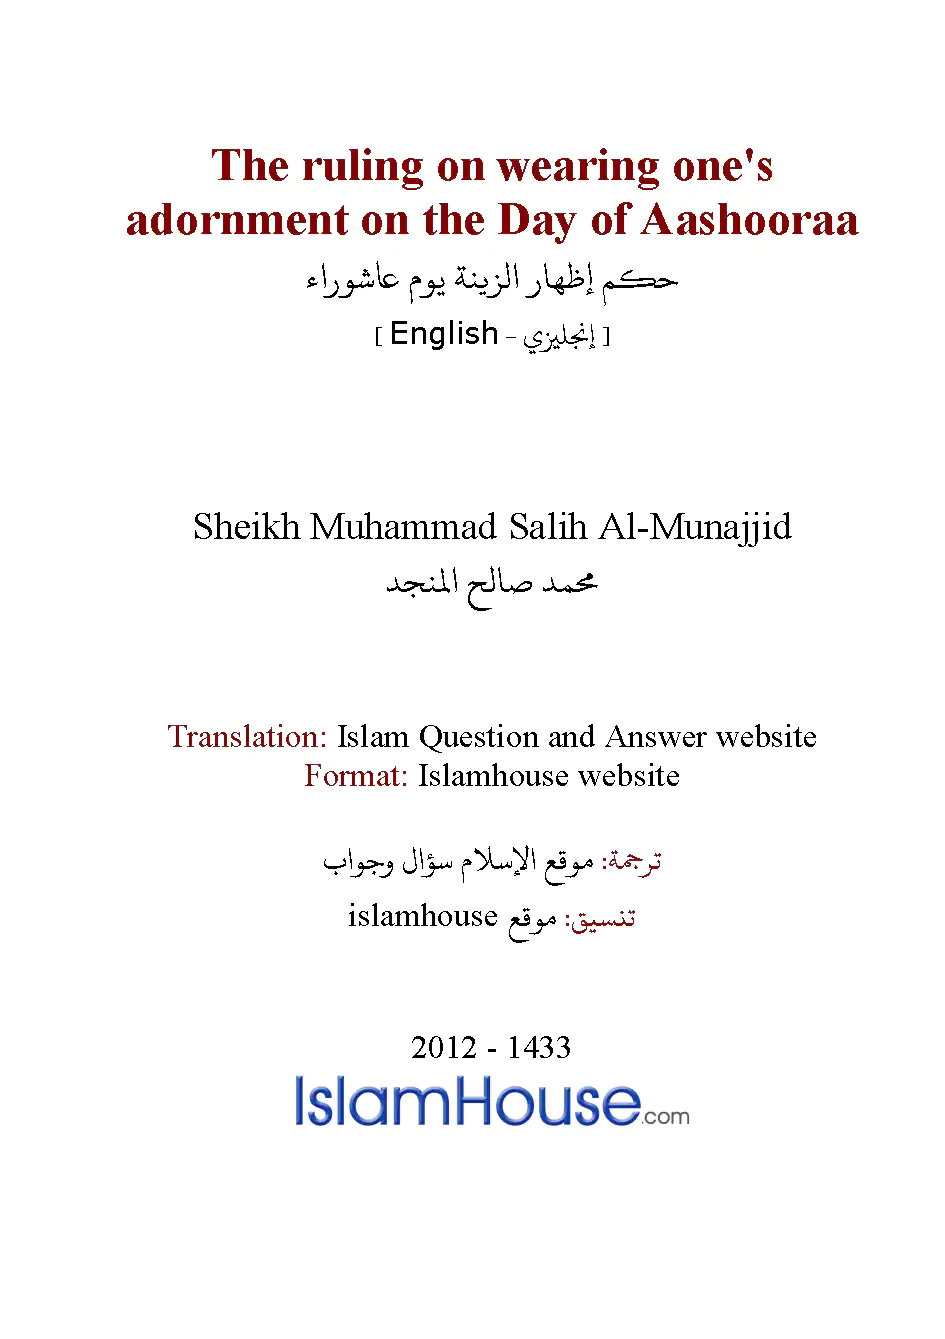 The ruling on wearing one’s adornment on the Day of Aashooraa